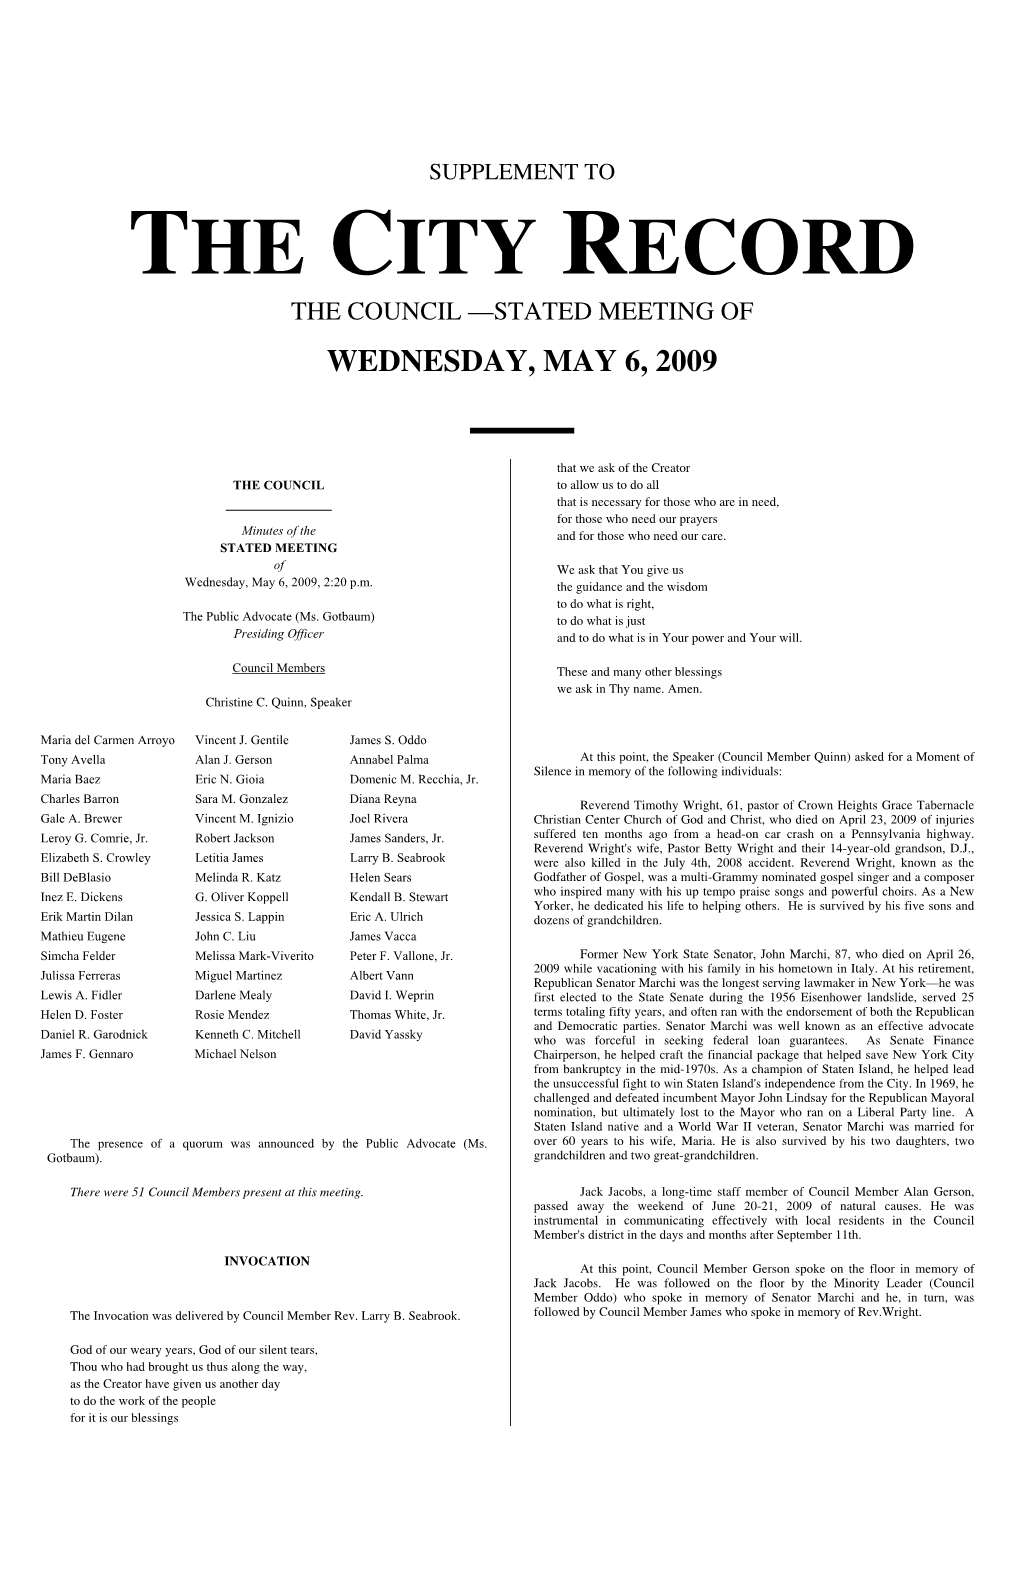 Supplement to the City Record the Council —Stated Meeting of Wednesday, May 6, 2009